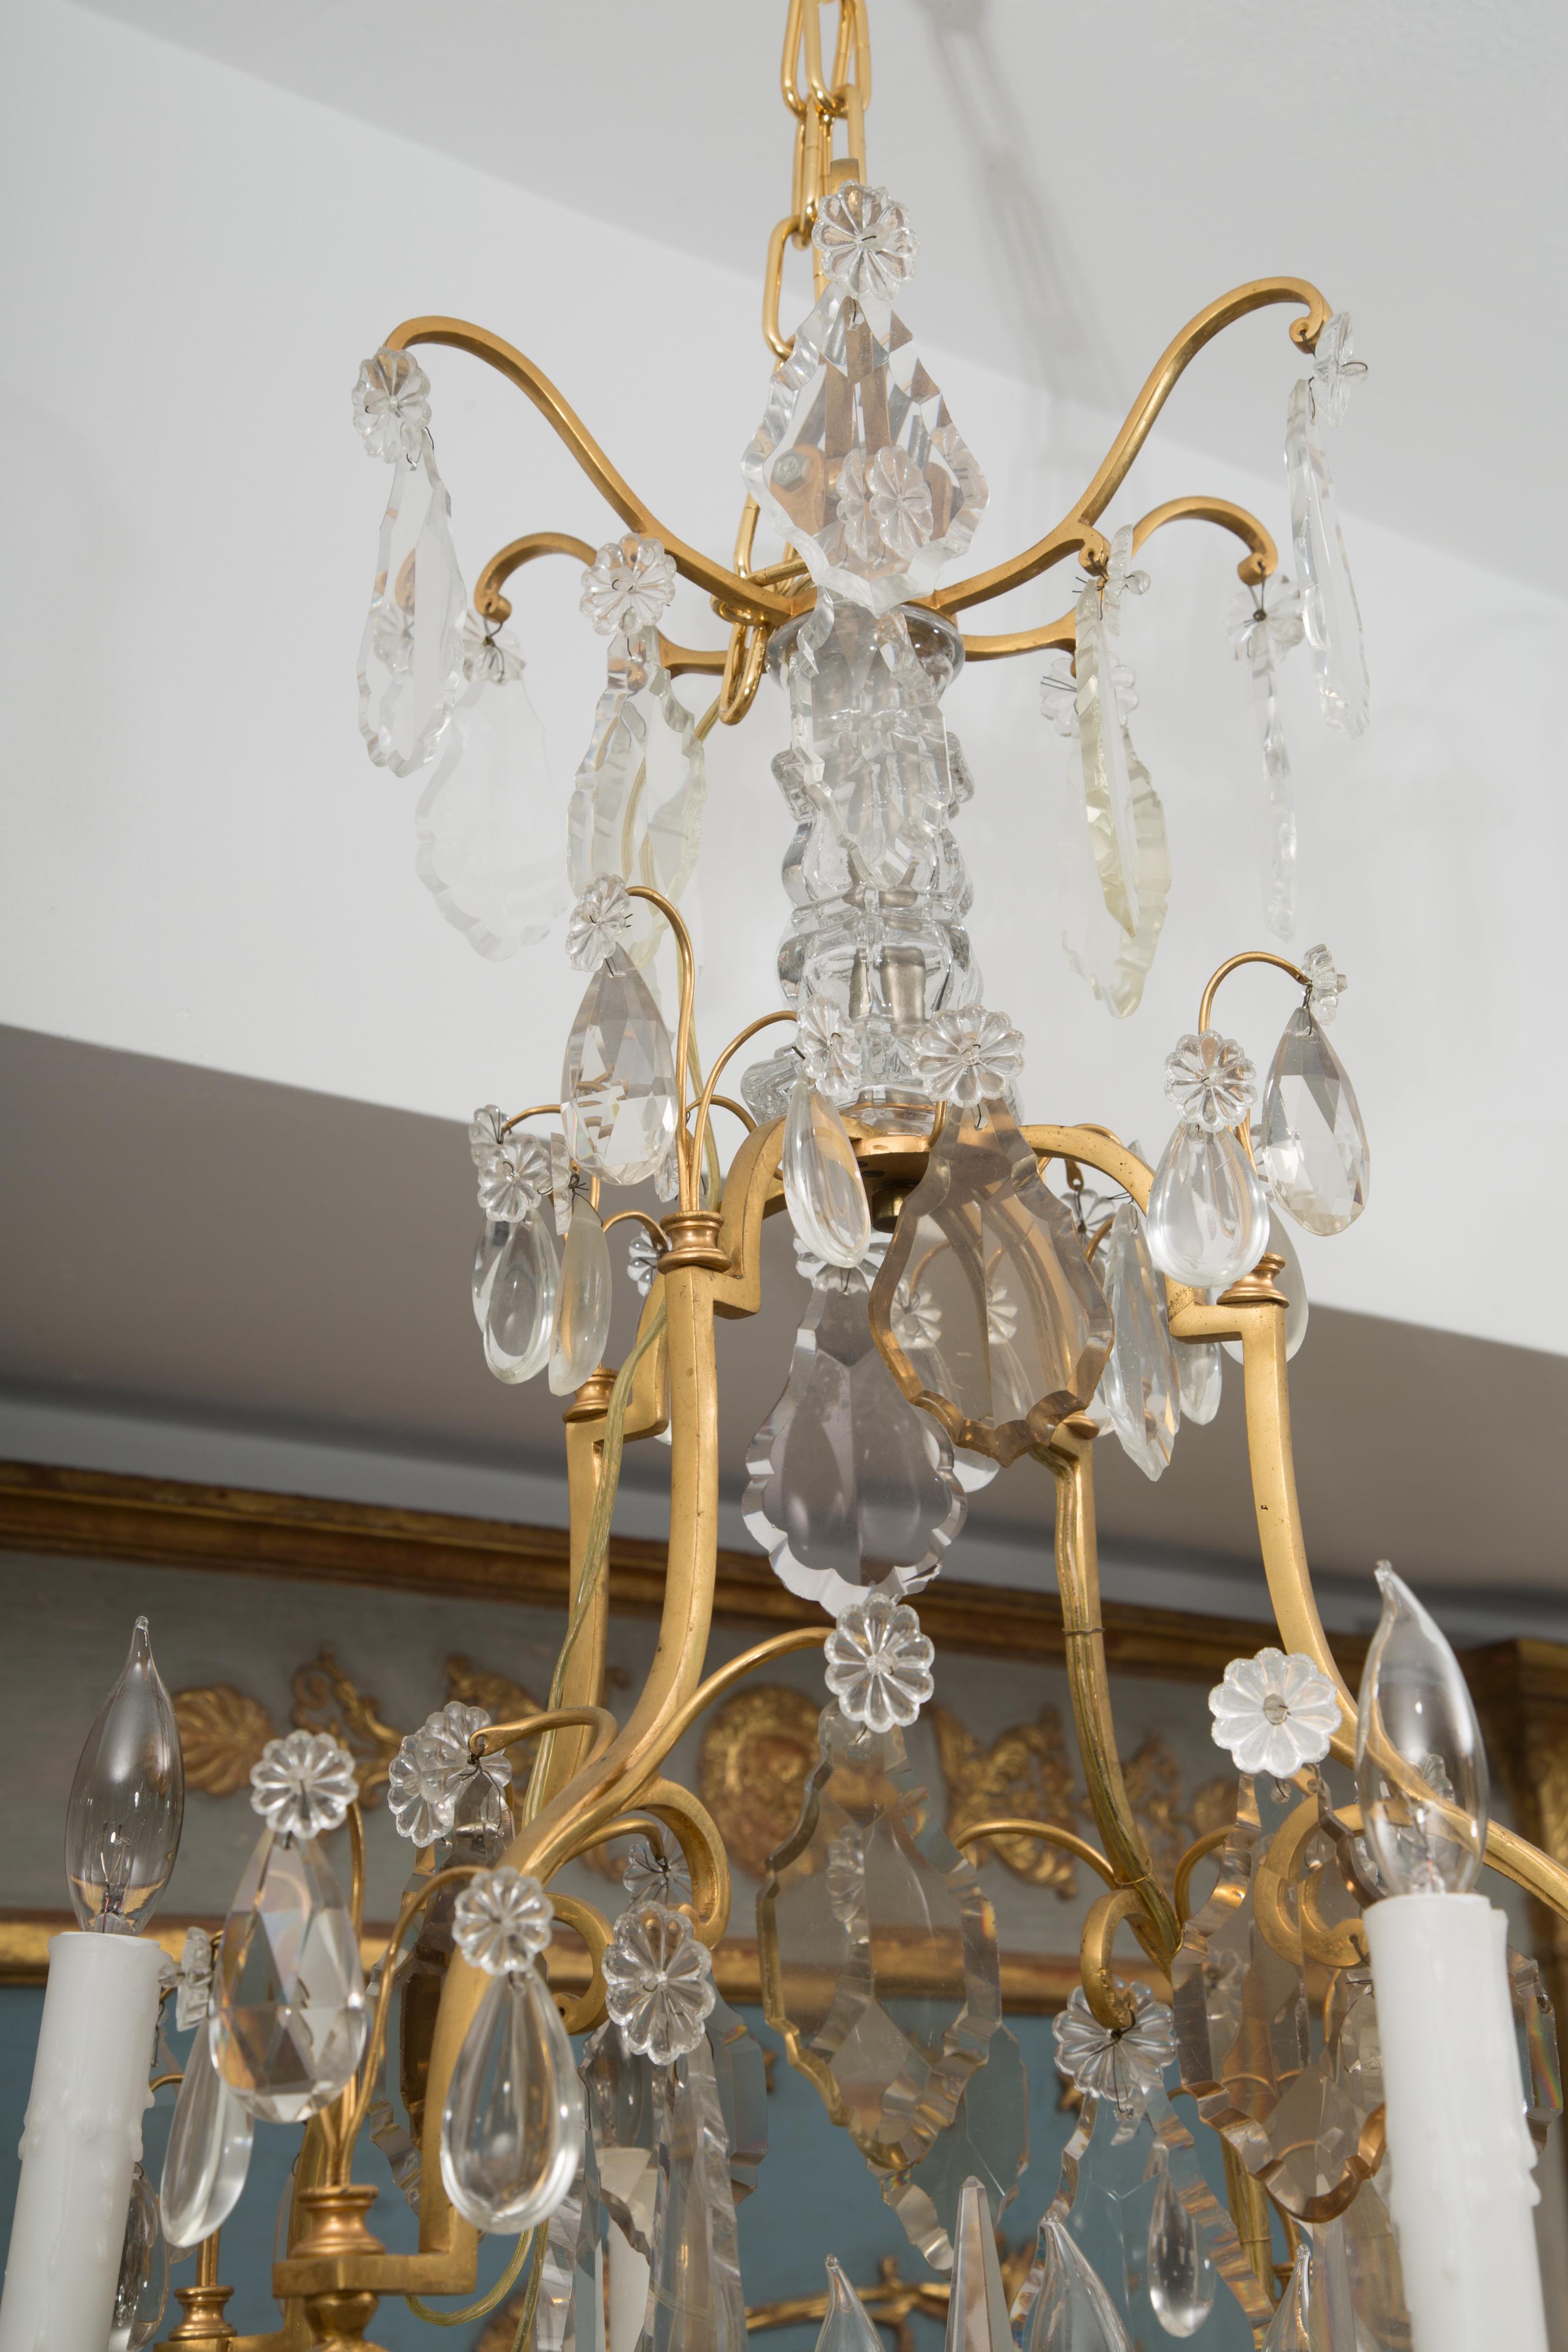 French Gilt Metal Chandelier with Crystal Drops im Zustand „Gut“ in WEST PALM BEACH, FL